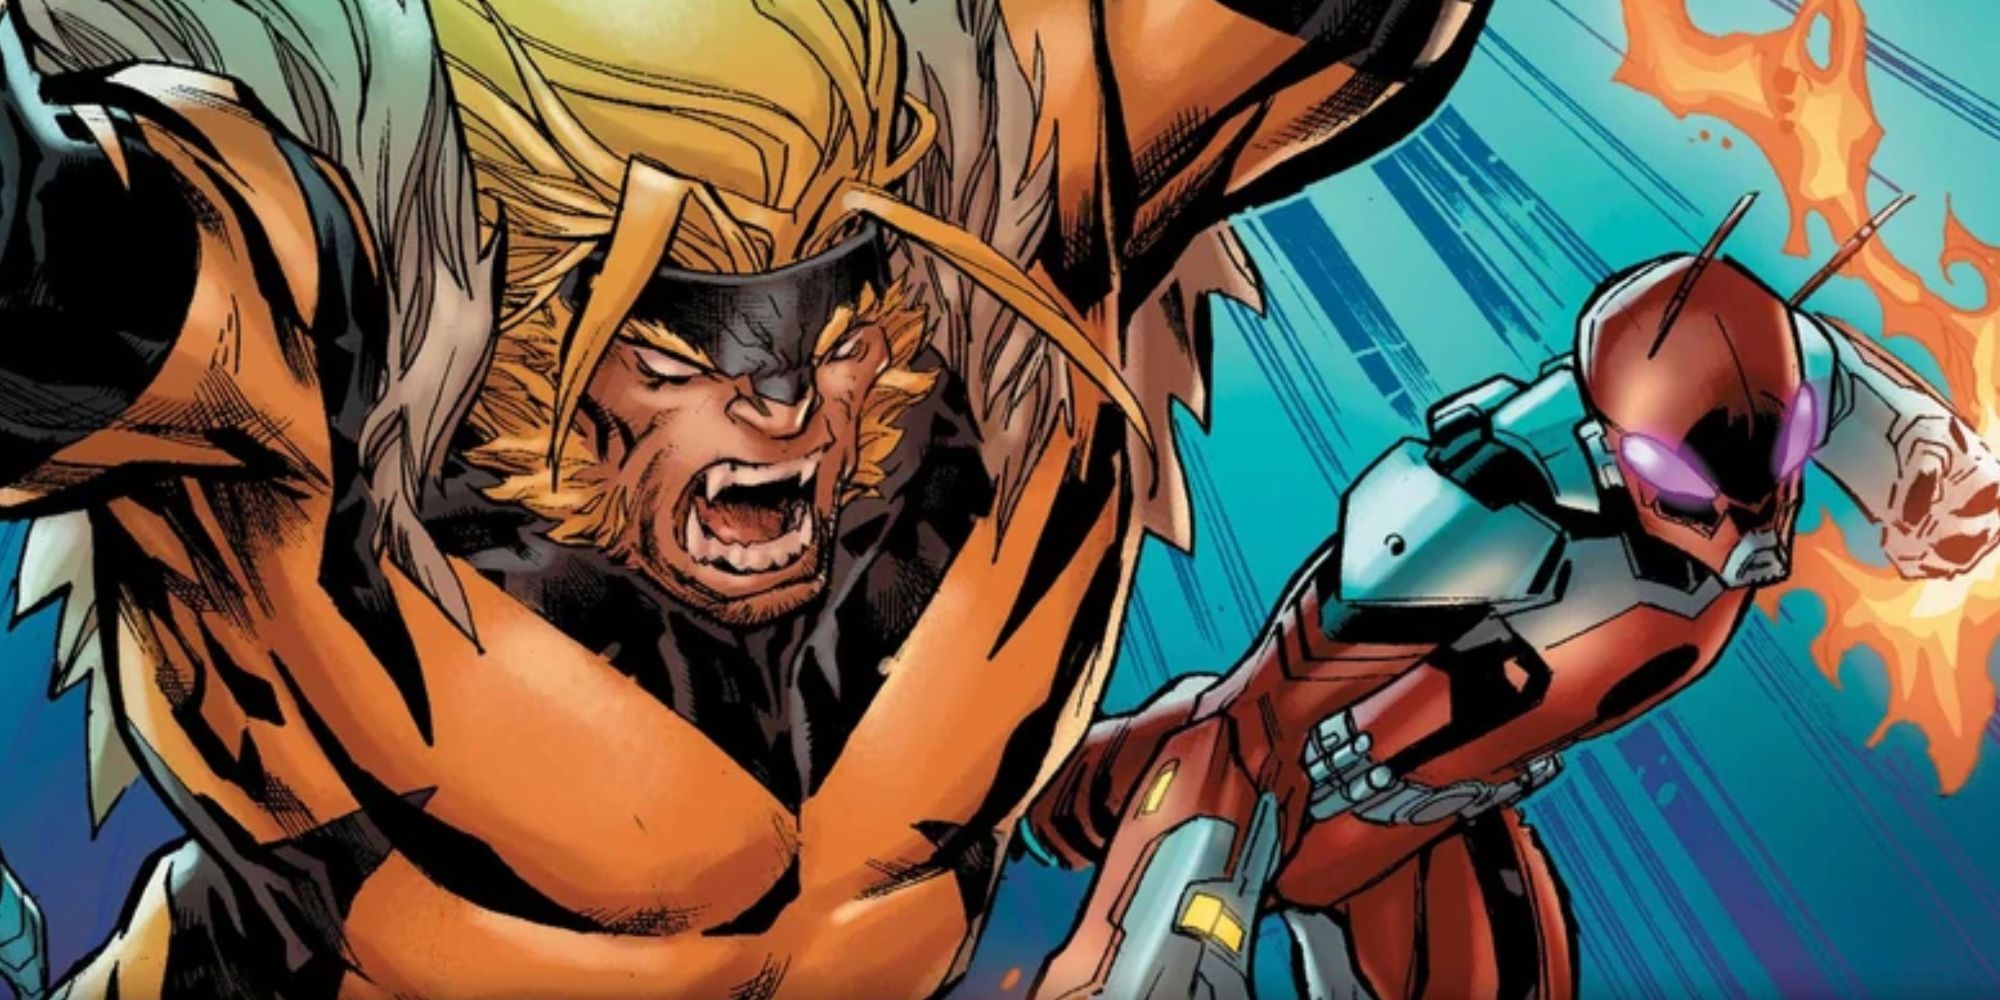 Sabretooth and Fire-Ant leap into battle in Heroes Reborn 2021 comic book.